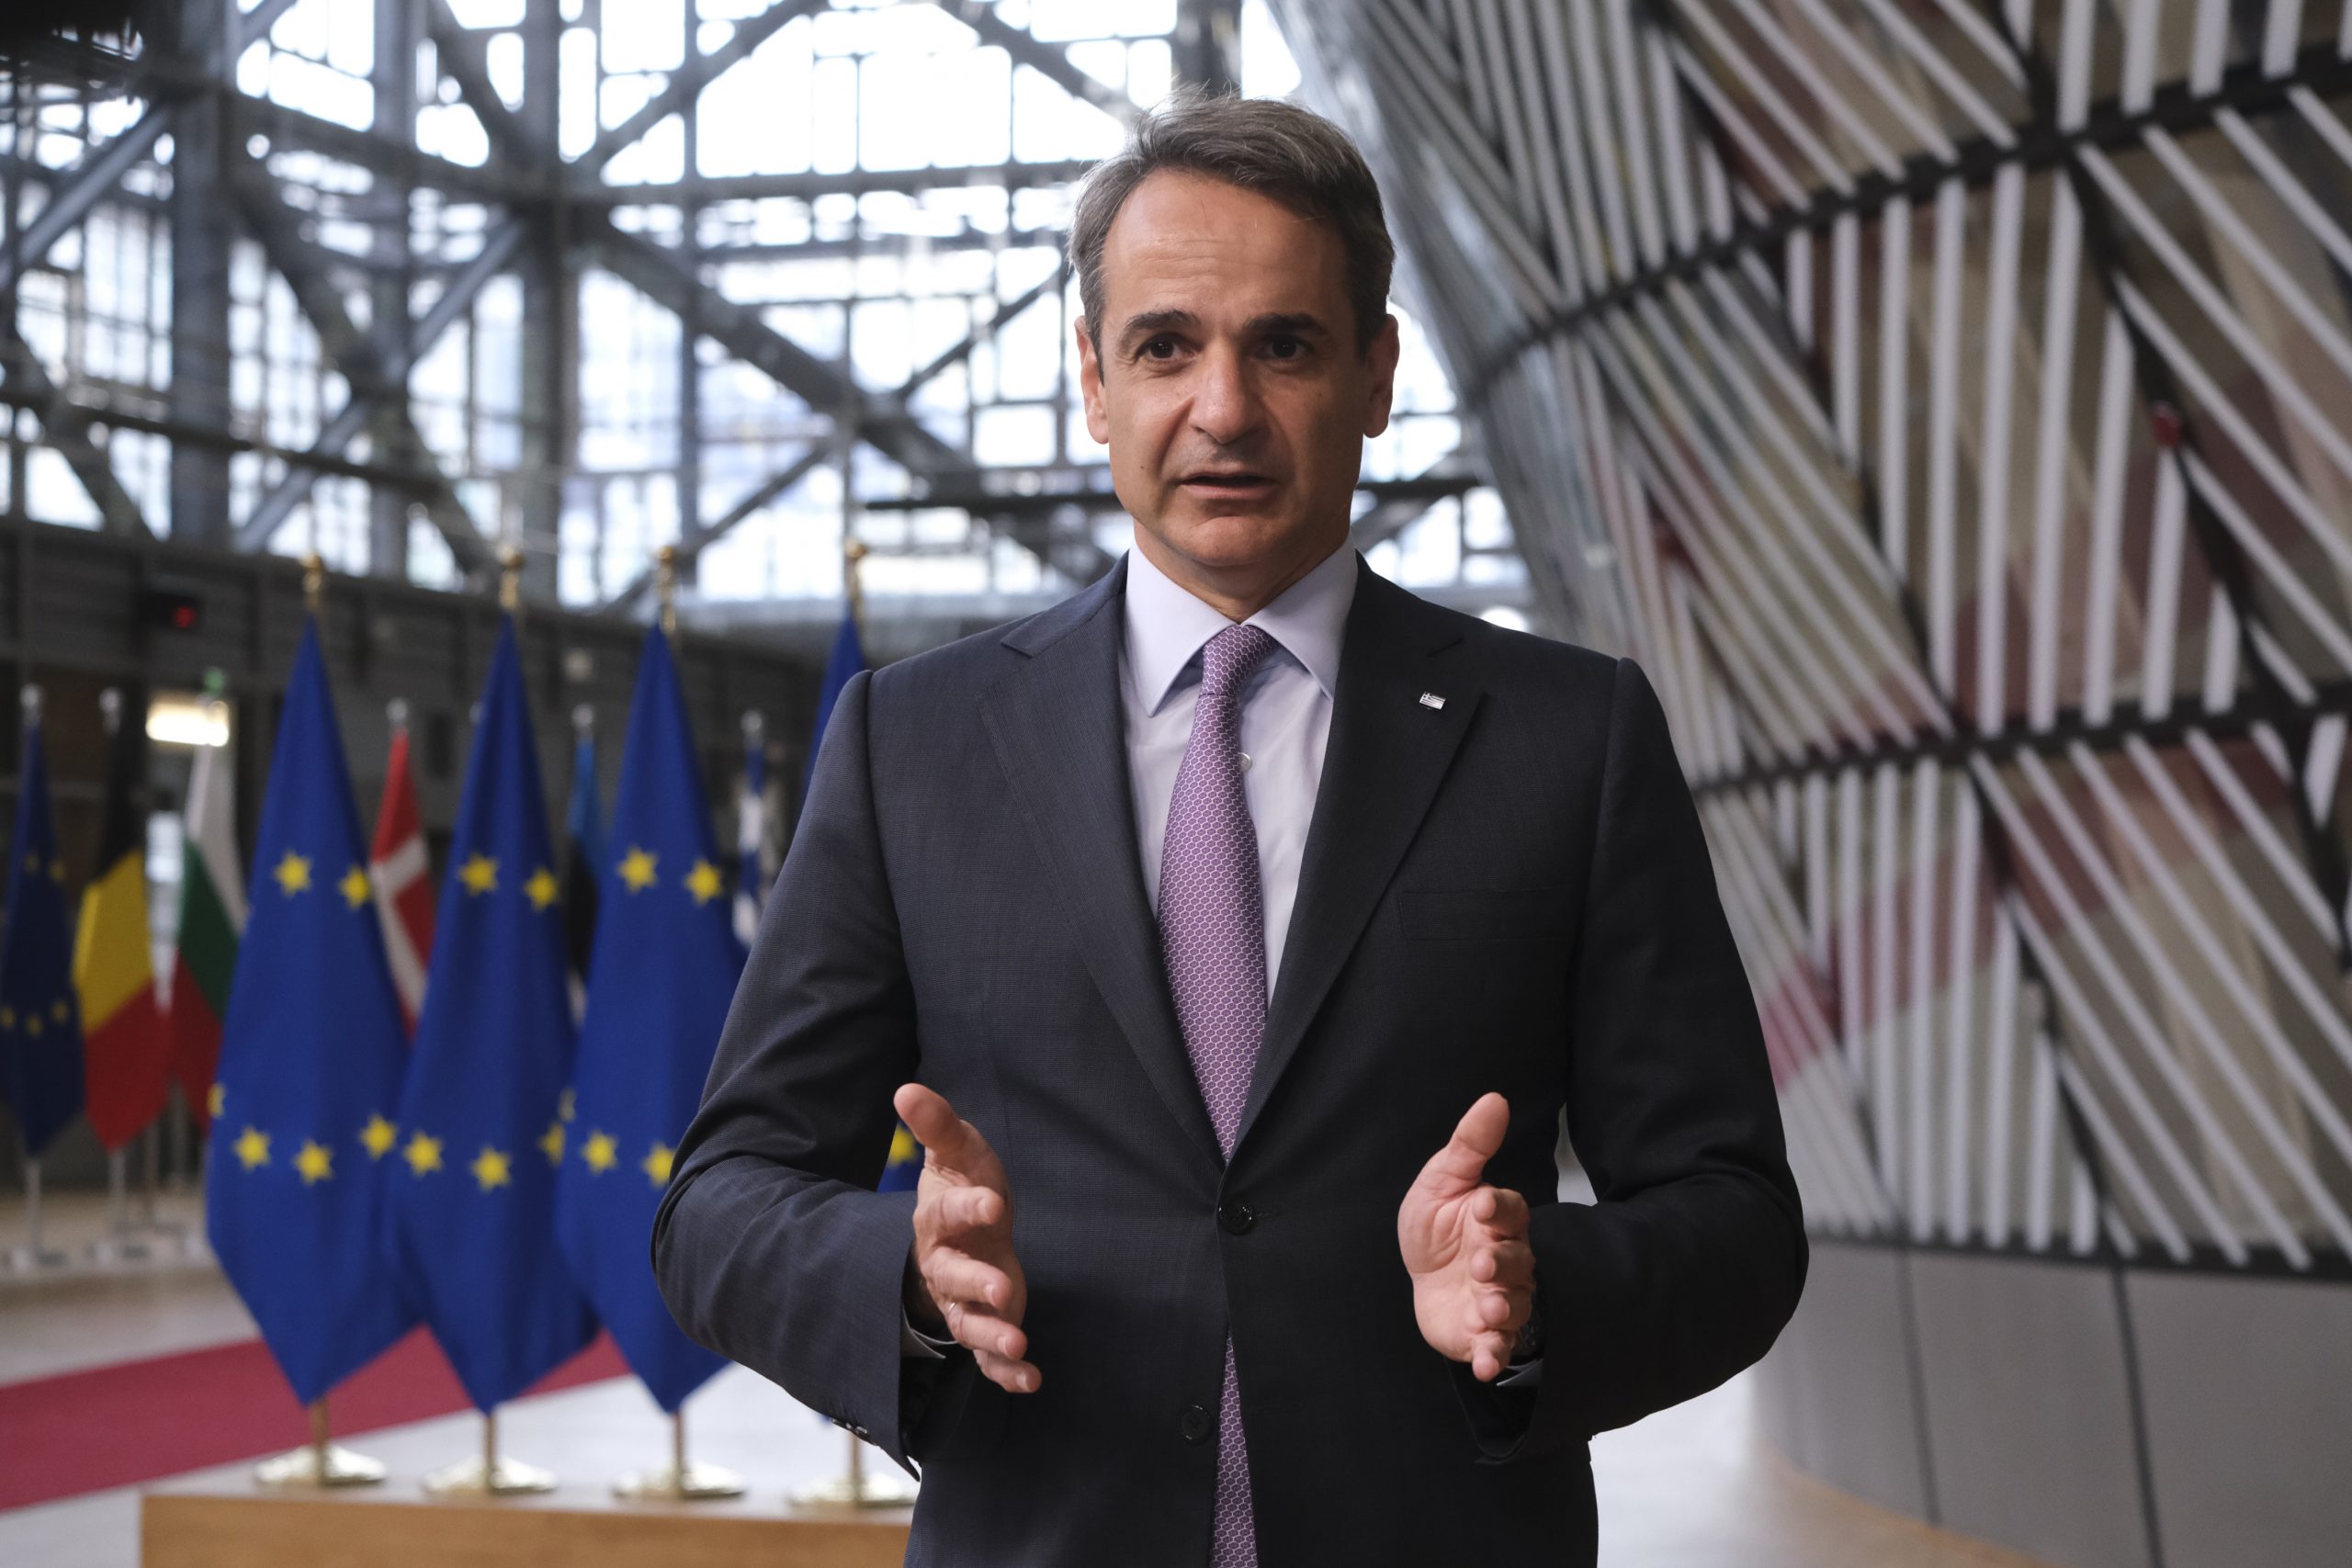 Mitsotakis: The problem of energy inflation requires a European solution